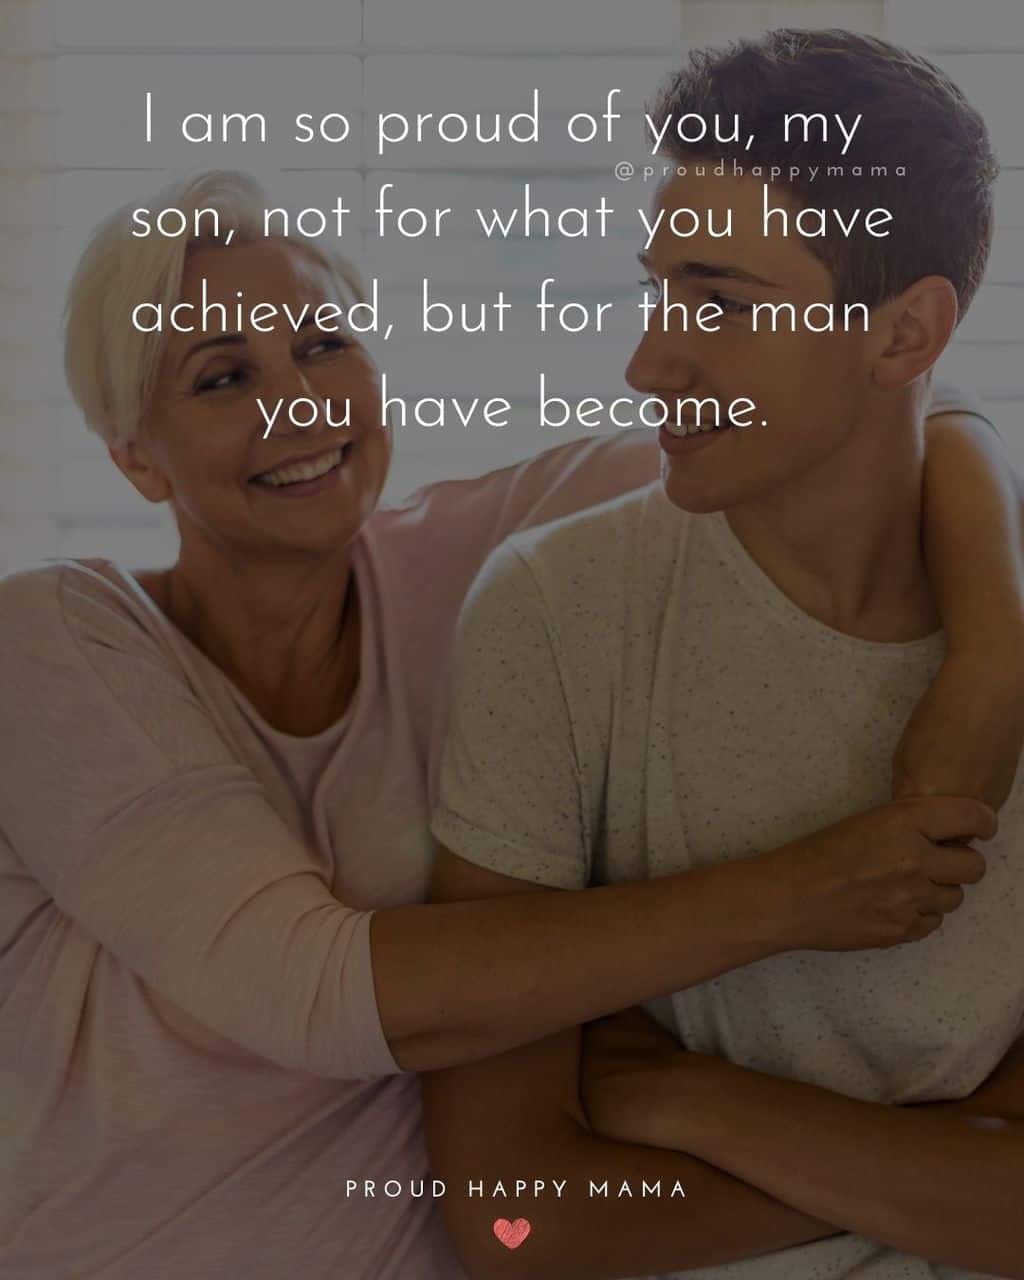 Son Quotes - I am so proud of you, my son, not for what you have achieved, but for the man you have become.’